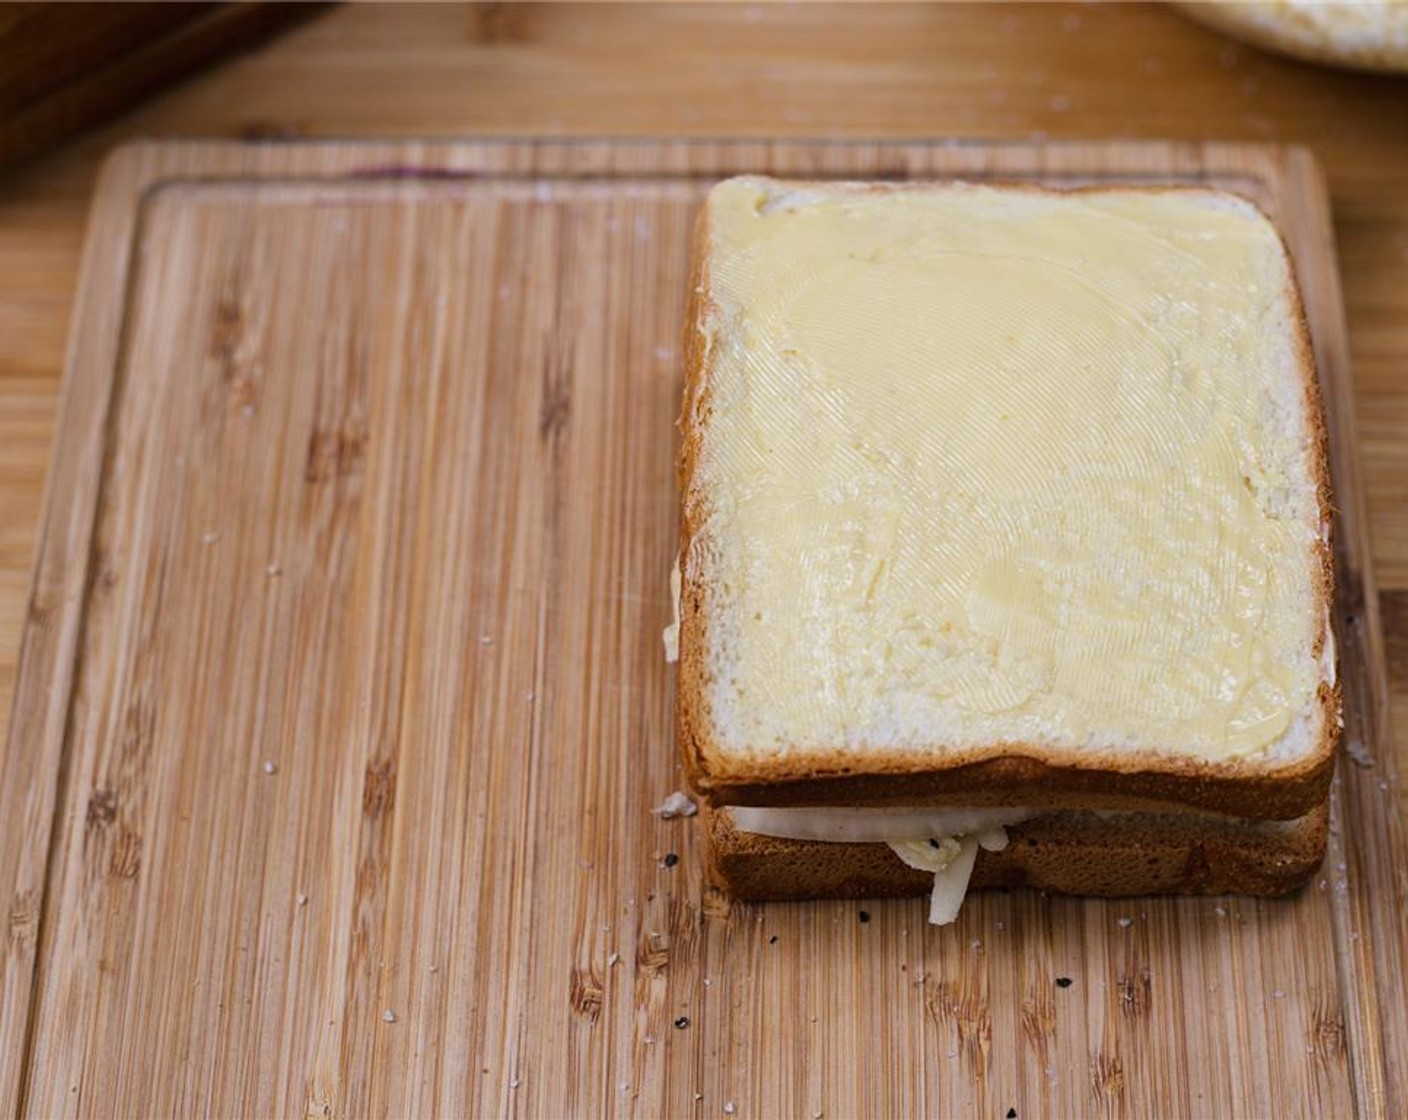 step 8 Place unbuttered side down on top of the sandwich. Press down gently to make sure the filling is snug between the two slices of bread. Repeat with the remaining slices of bread, cheese, sliced tomatoes and onion.